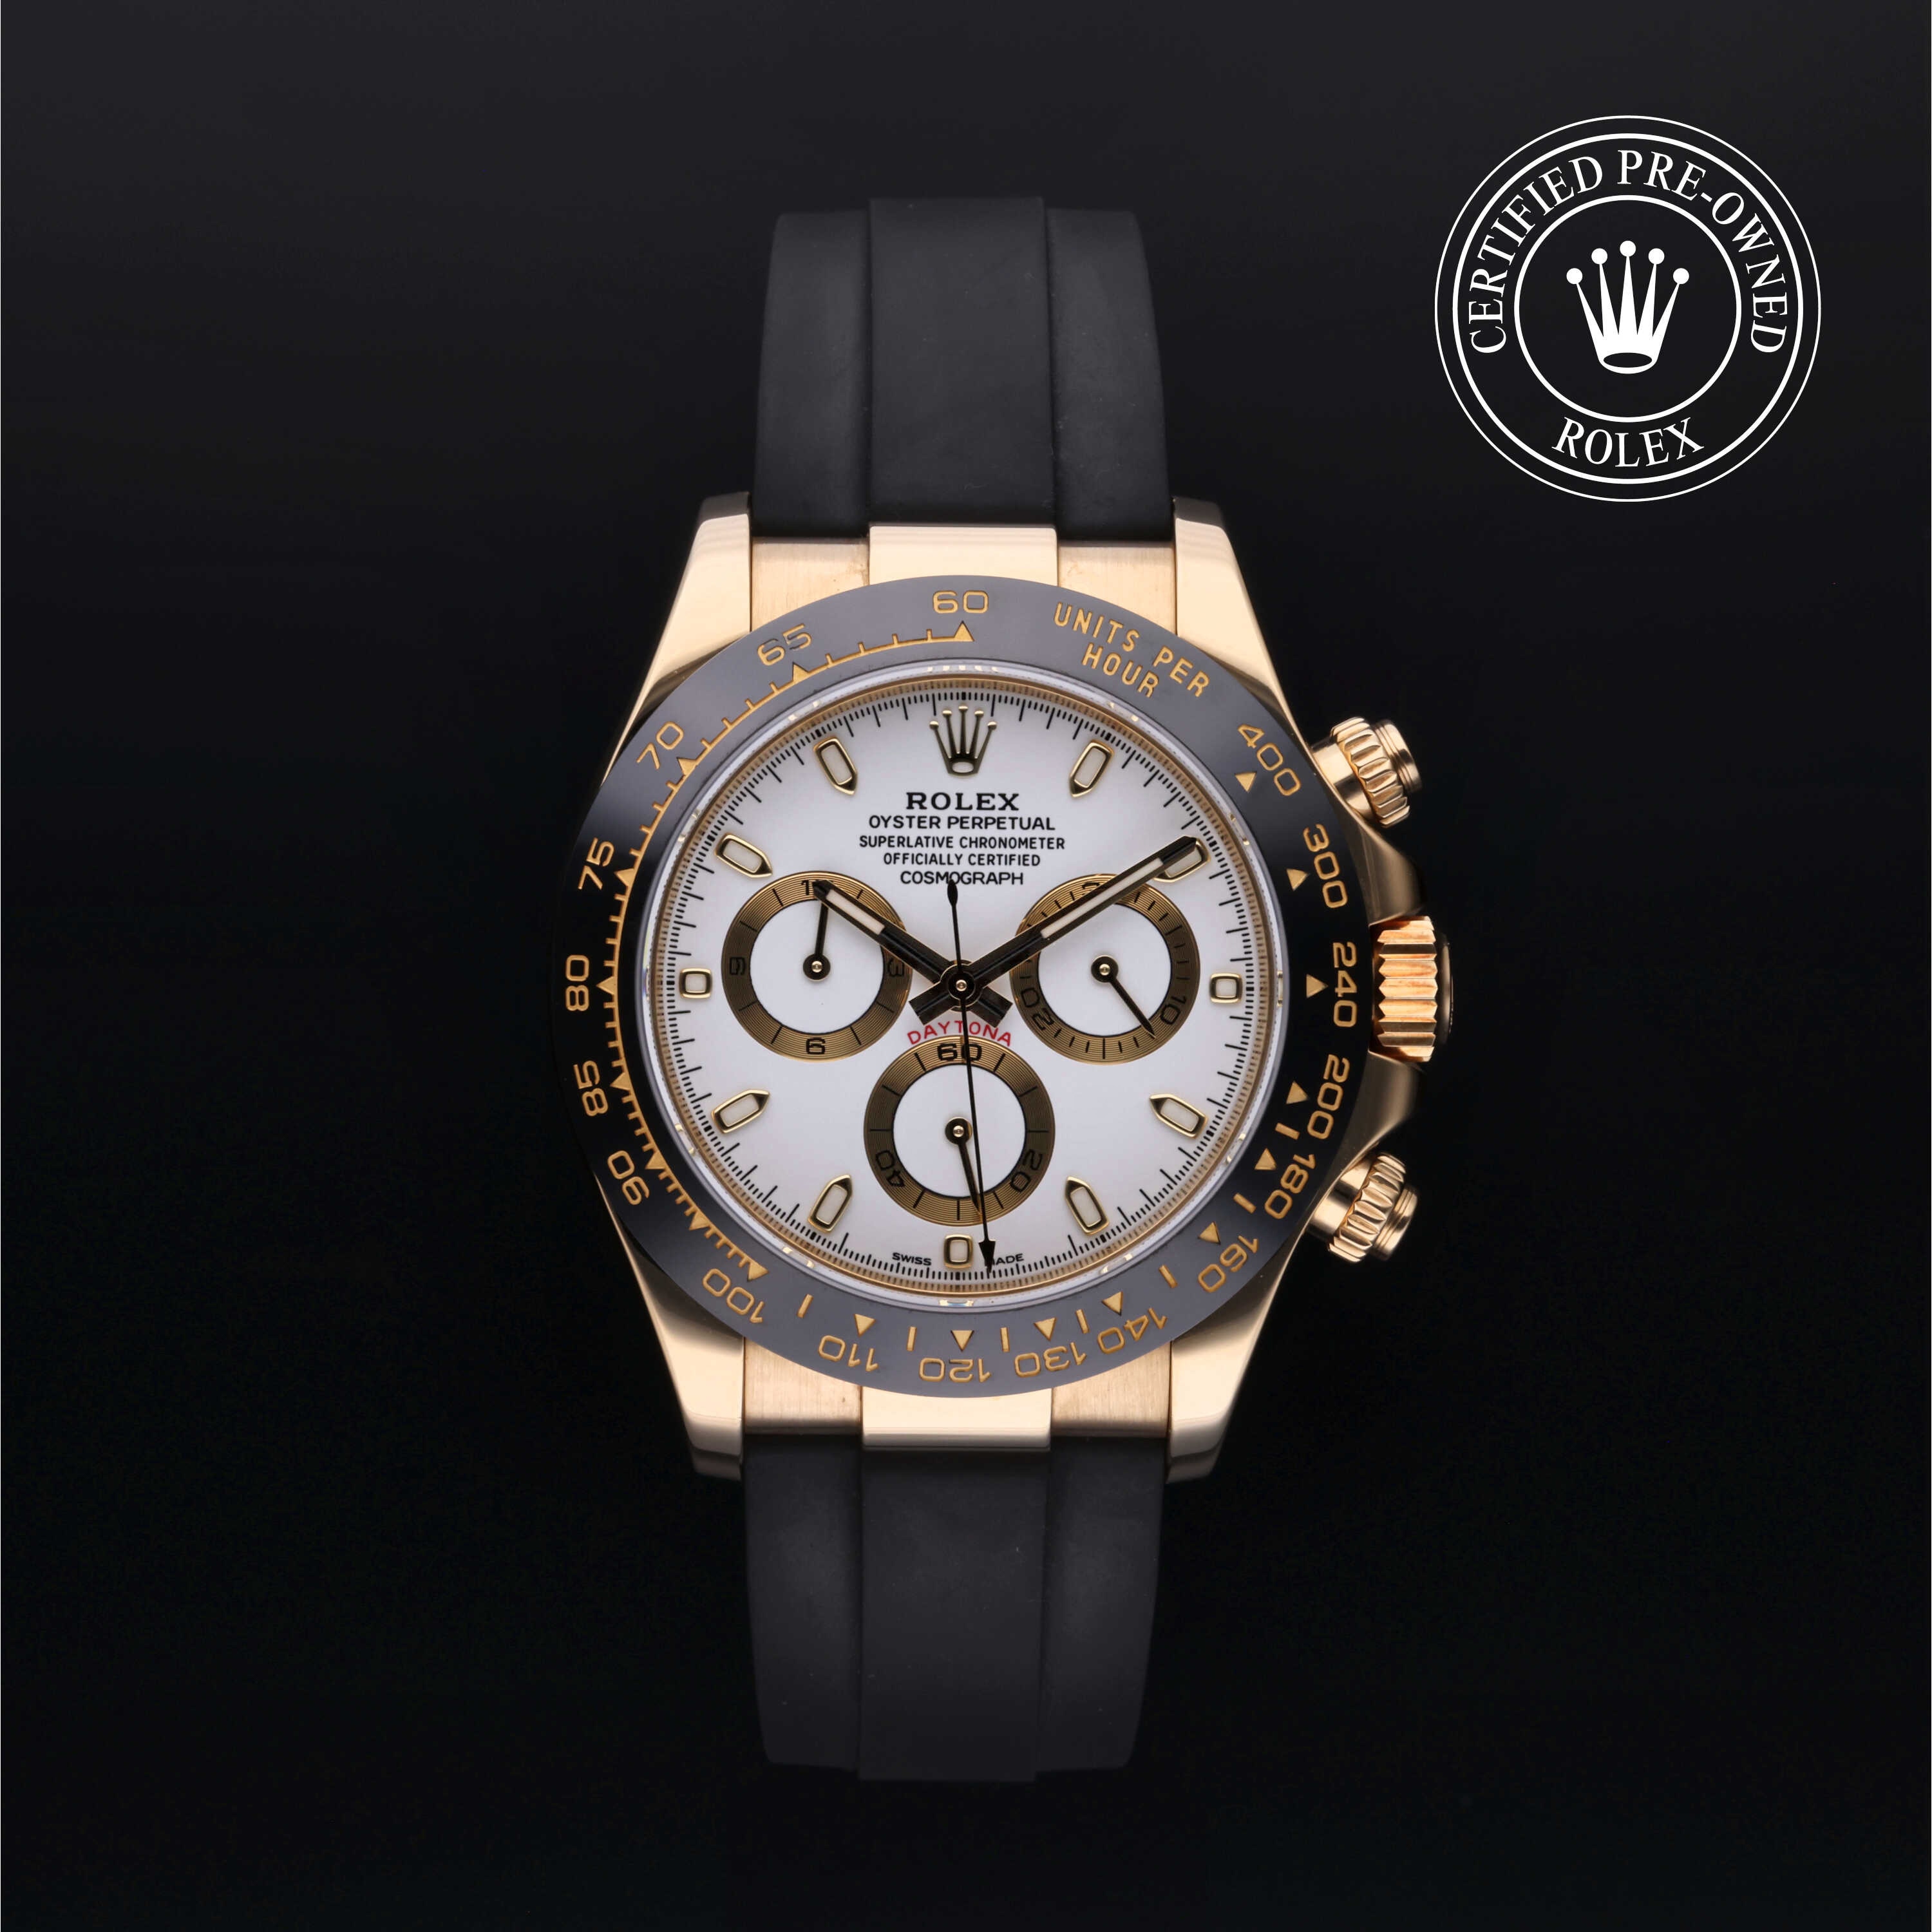 Authentic / Pre-owned WATCHES | Pre owned watches, Luxury, Authentic